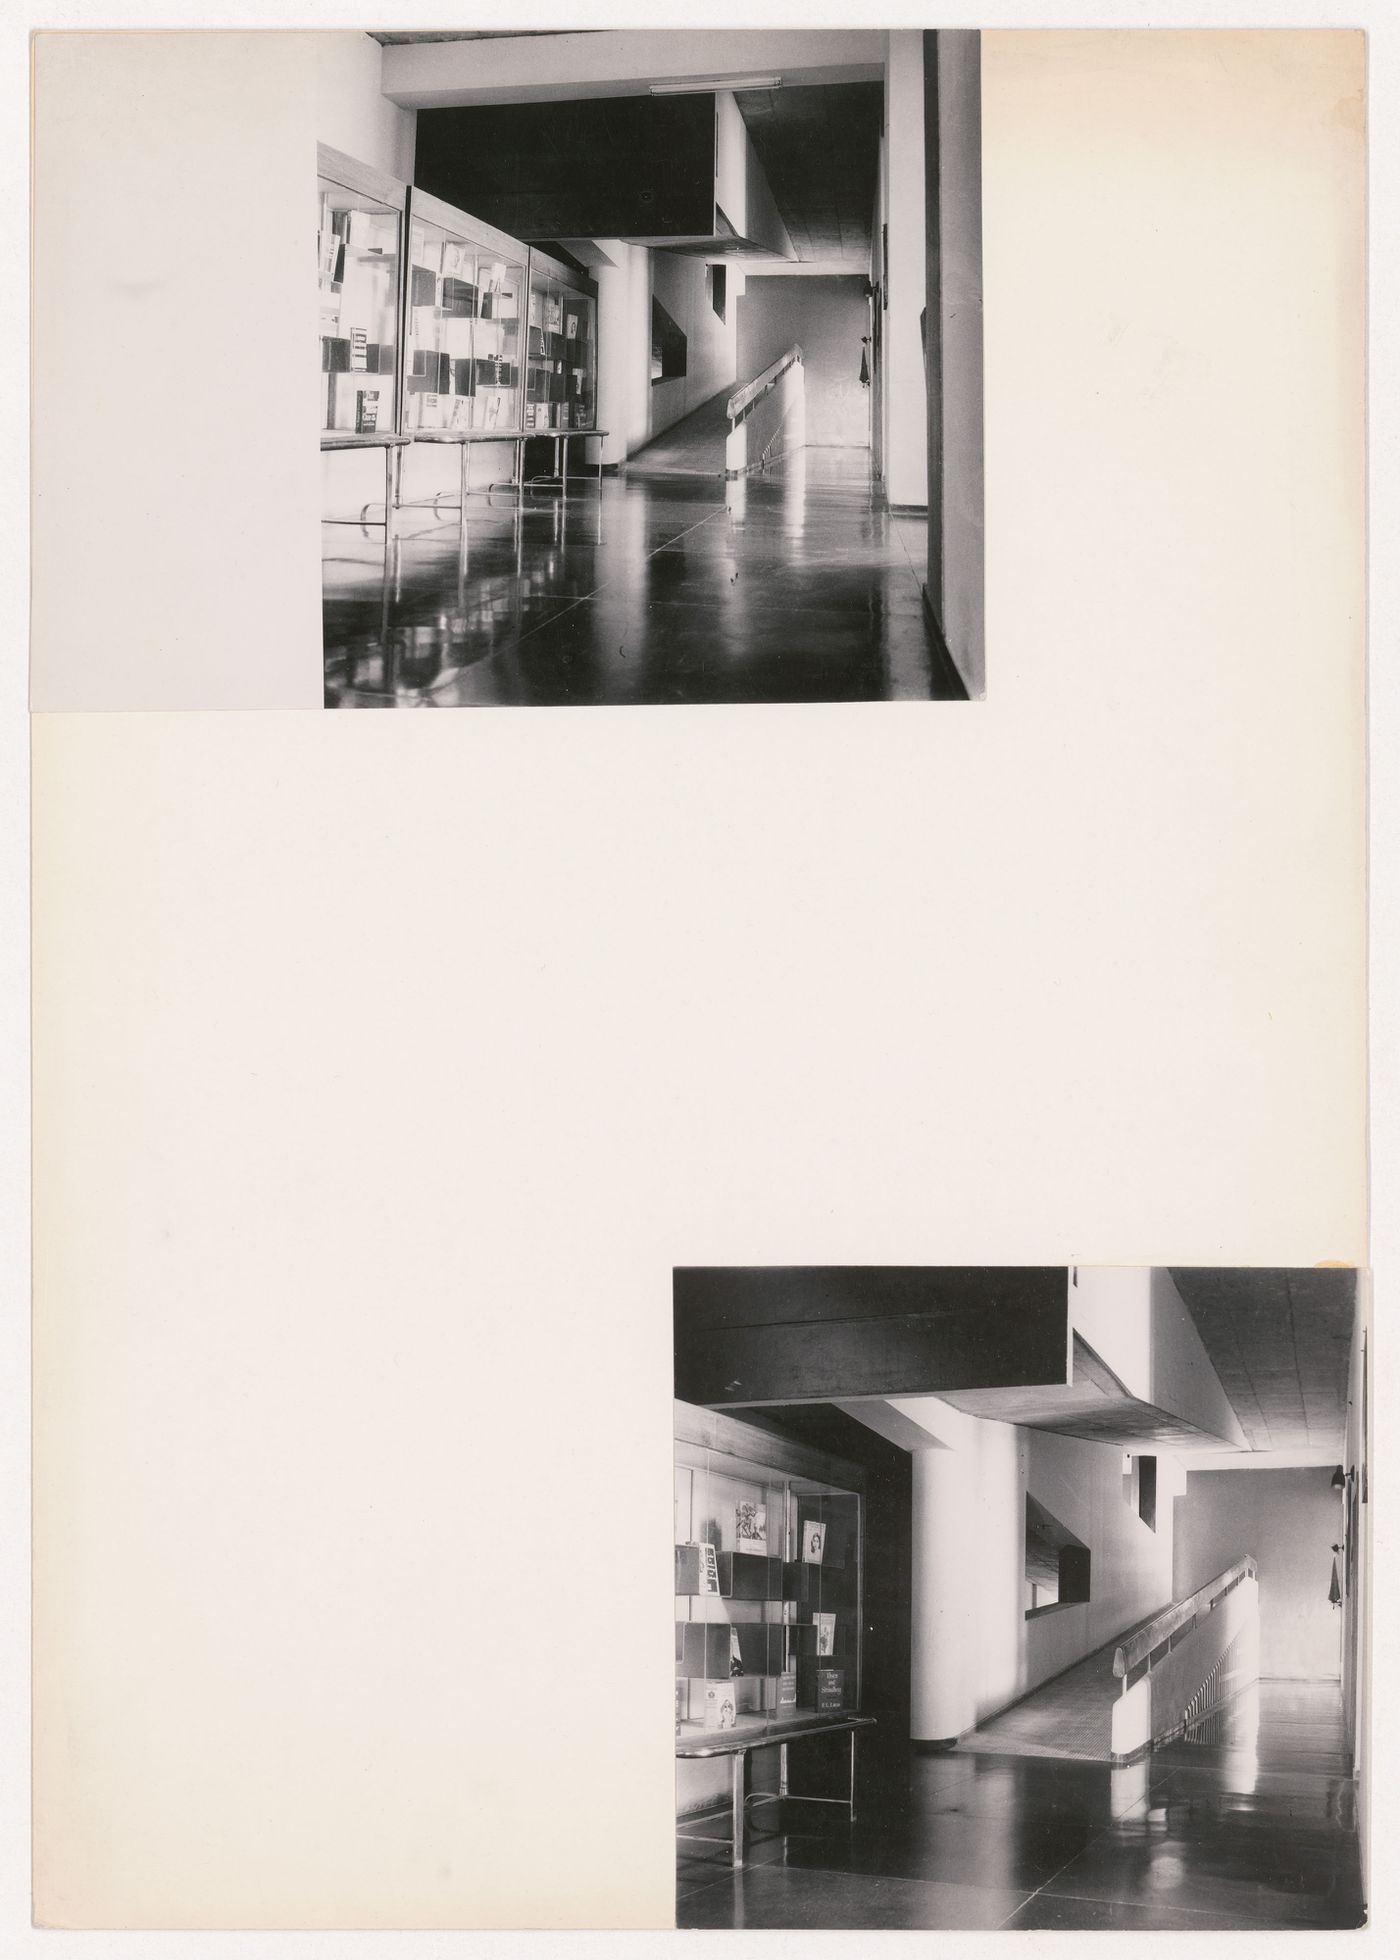 Interior views of the Central State Library, Sector 17, Chandigarh, India